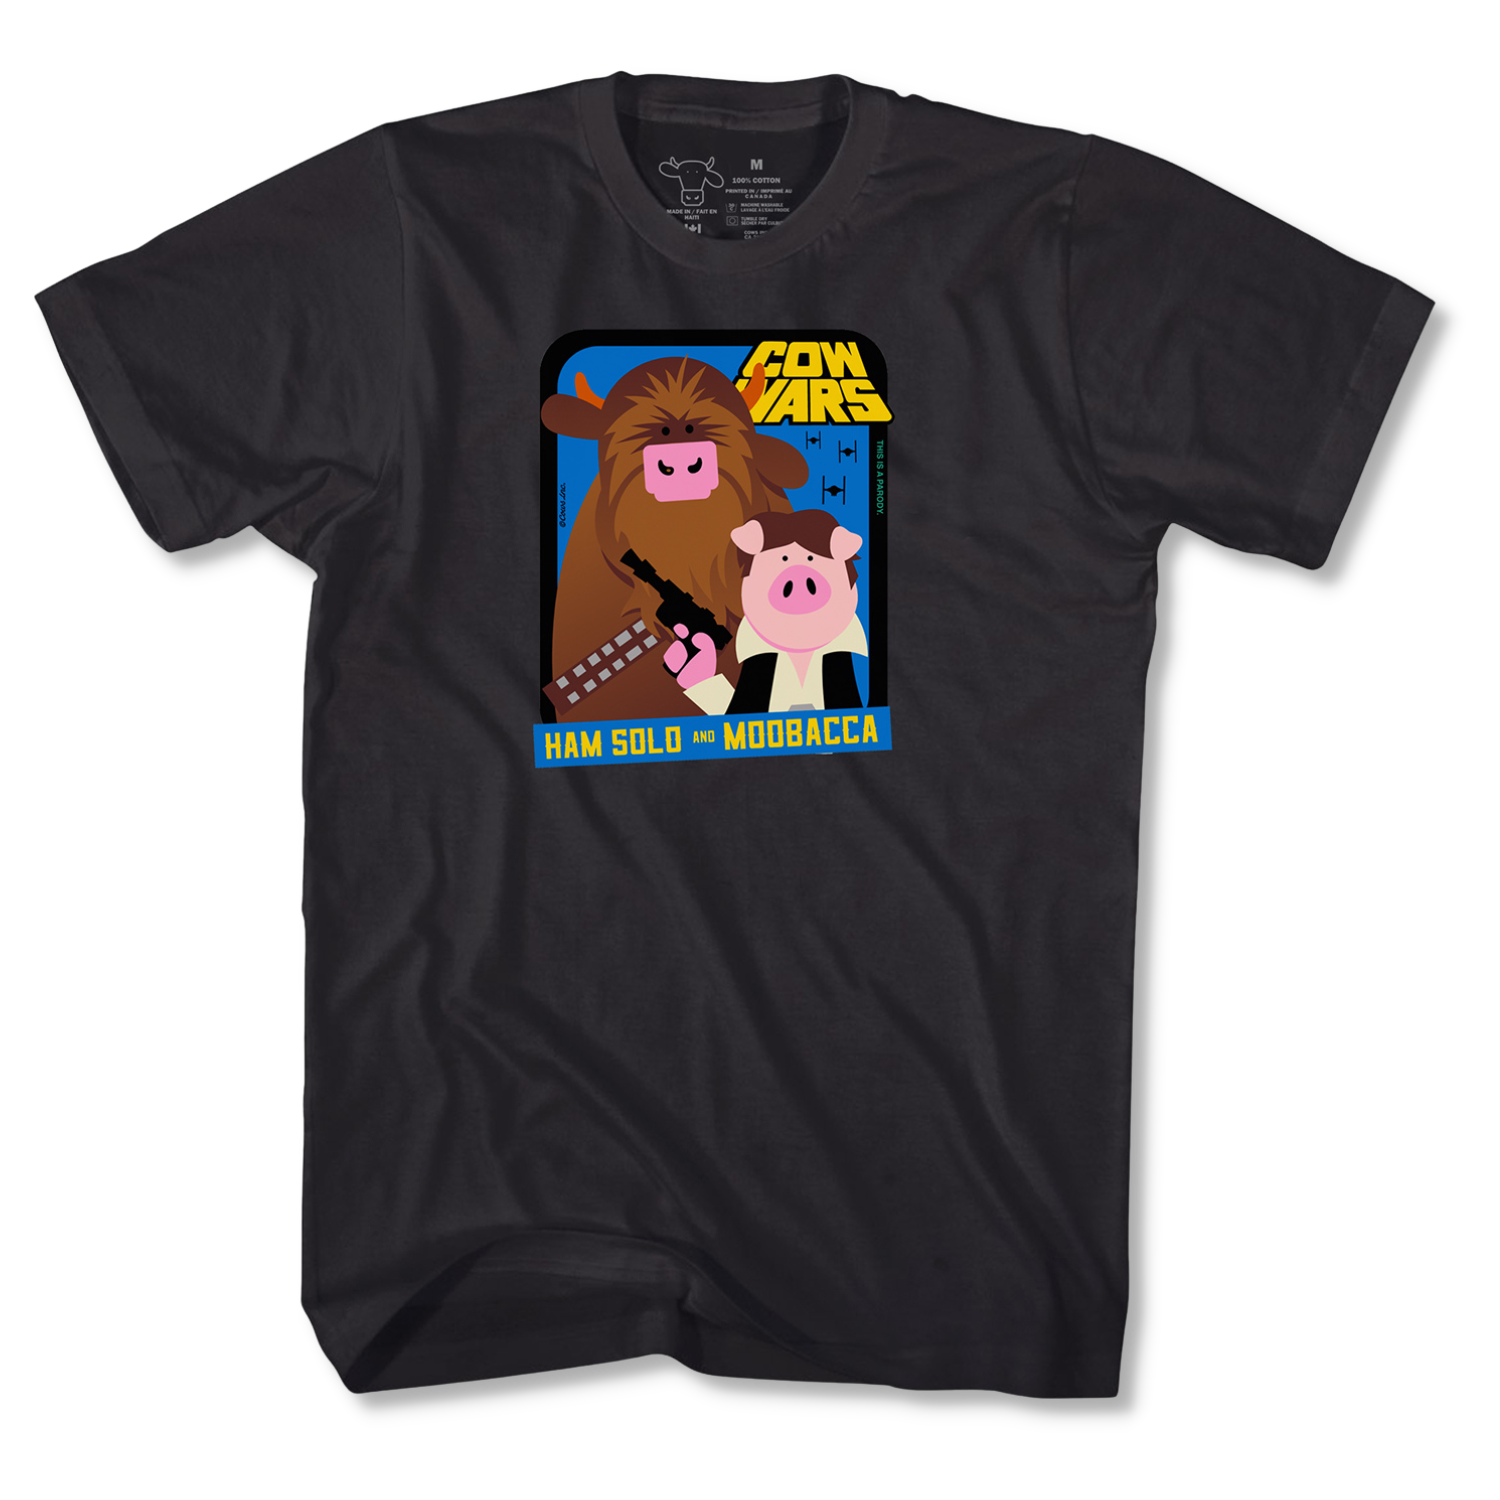 COW Wars Ham Solo and MOObacca Classic T